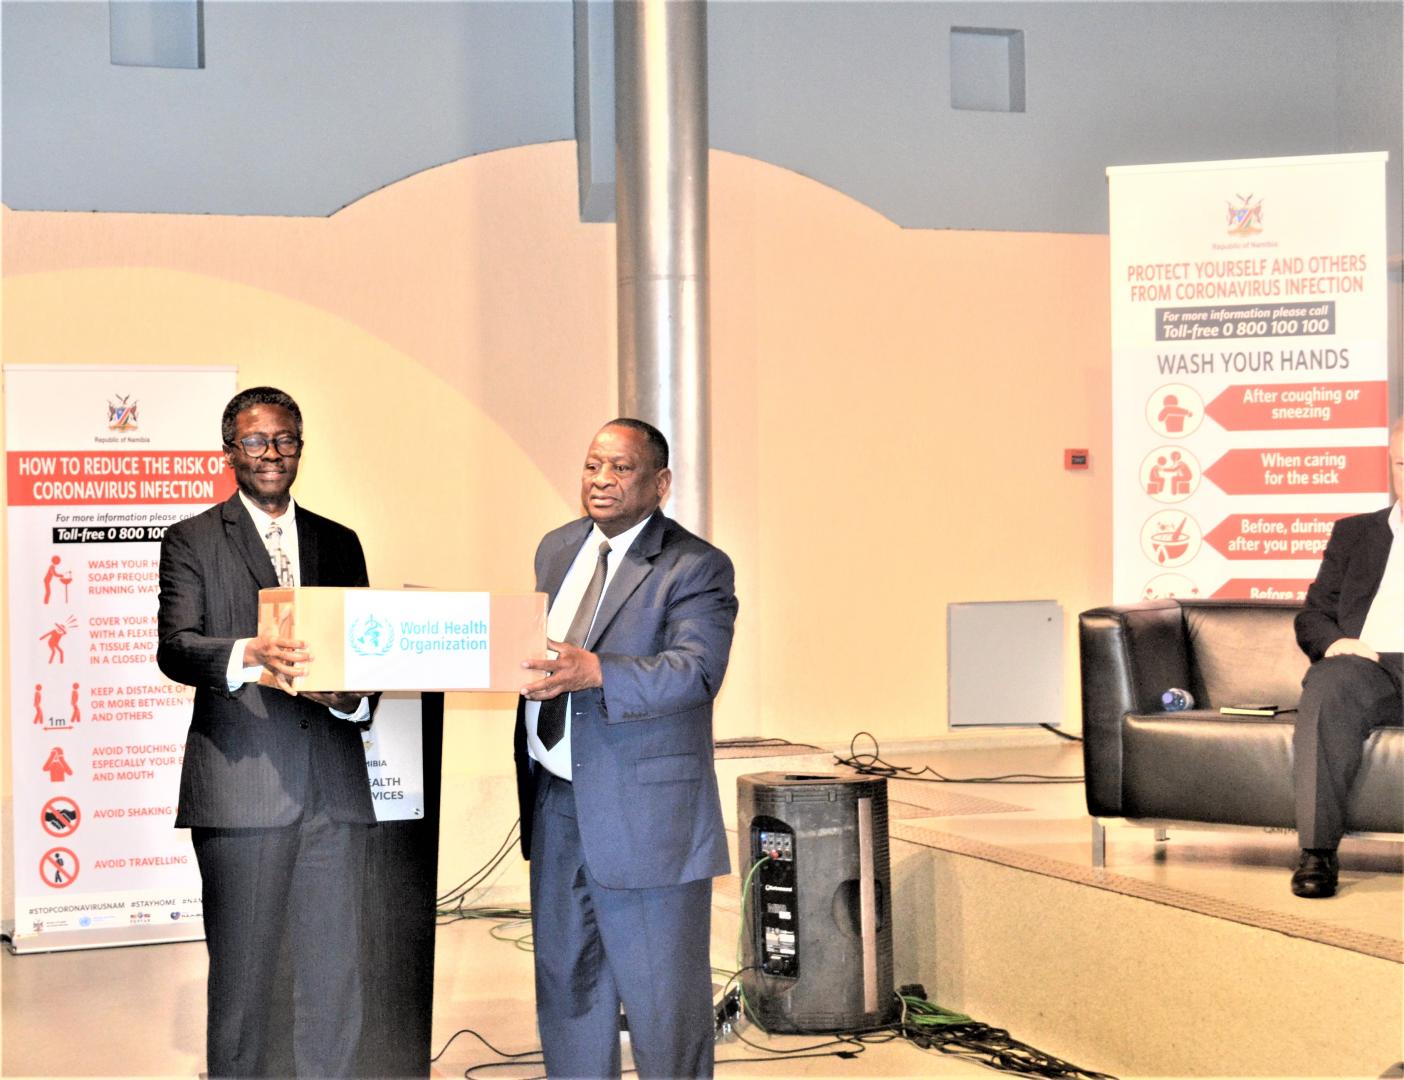 WHO Representative to Namibia, Dr Charles Sagoe-Moses handing over the COVID-19 medical supplies to the Minister of Health and Social Services, Dr Kalumbi Shangula 